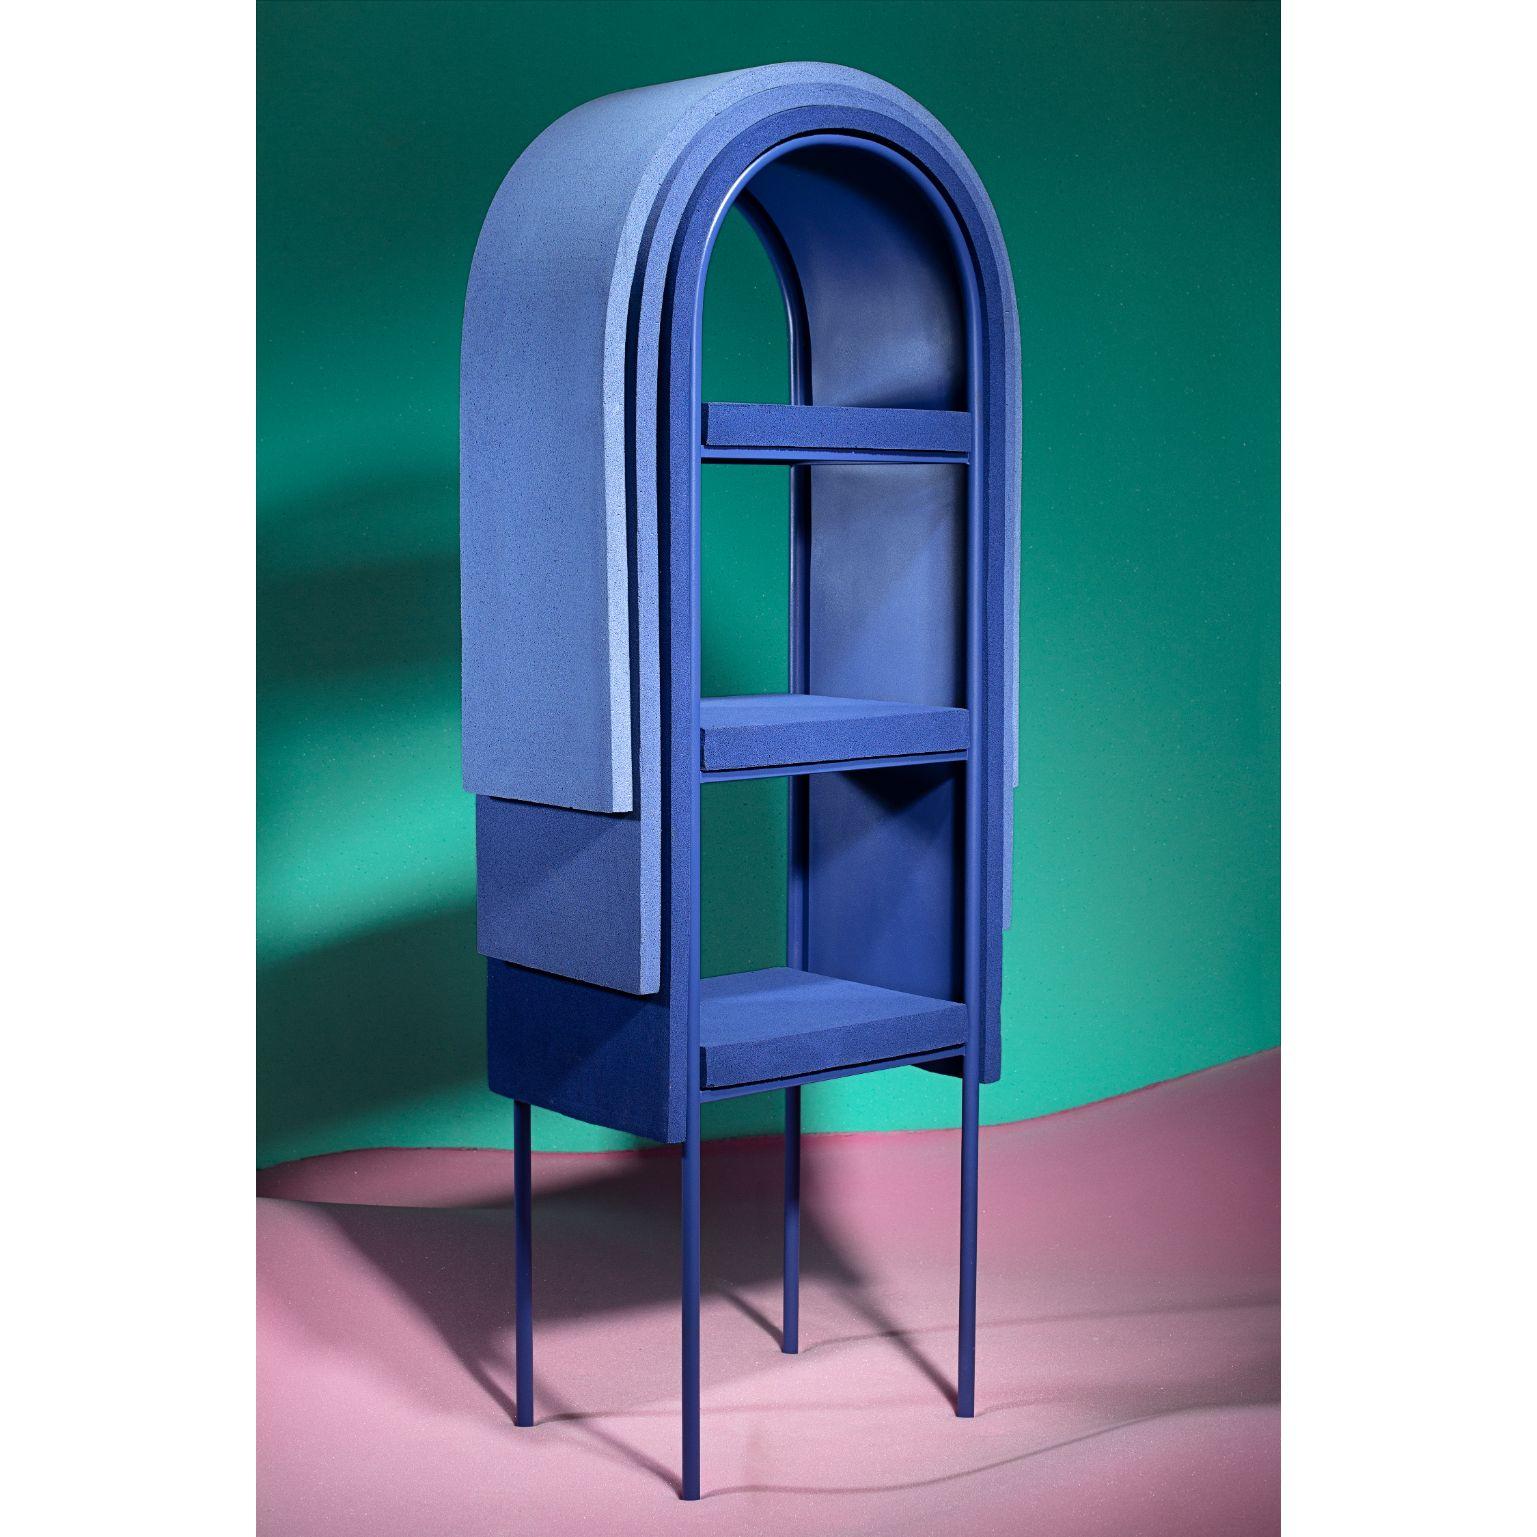 D33 - bookcase by Cultivado Em Casa
Dimensions: 70 x 40 x 80 cm
Materials: D33 foam, acrylic paint, acrylic resin, carbon steel.

Also available: different colors

The D33 collection is intended to enhance foam, a material so present in